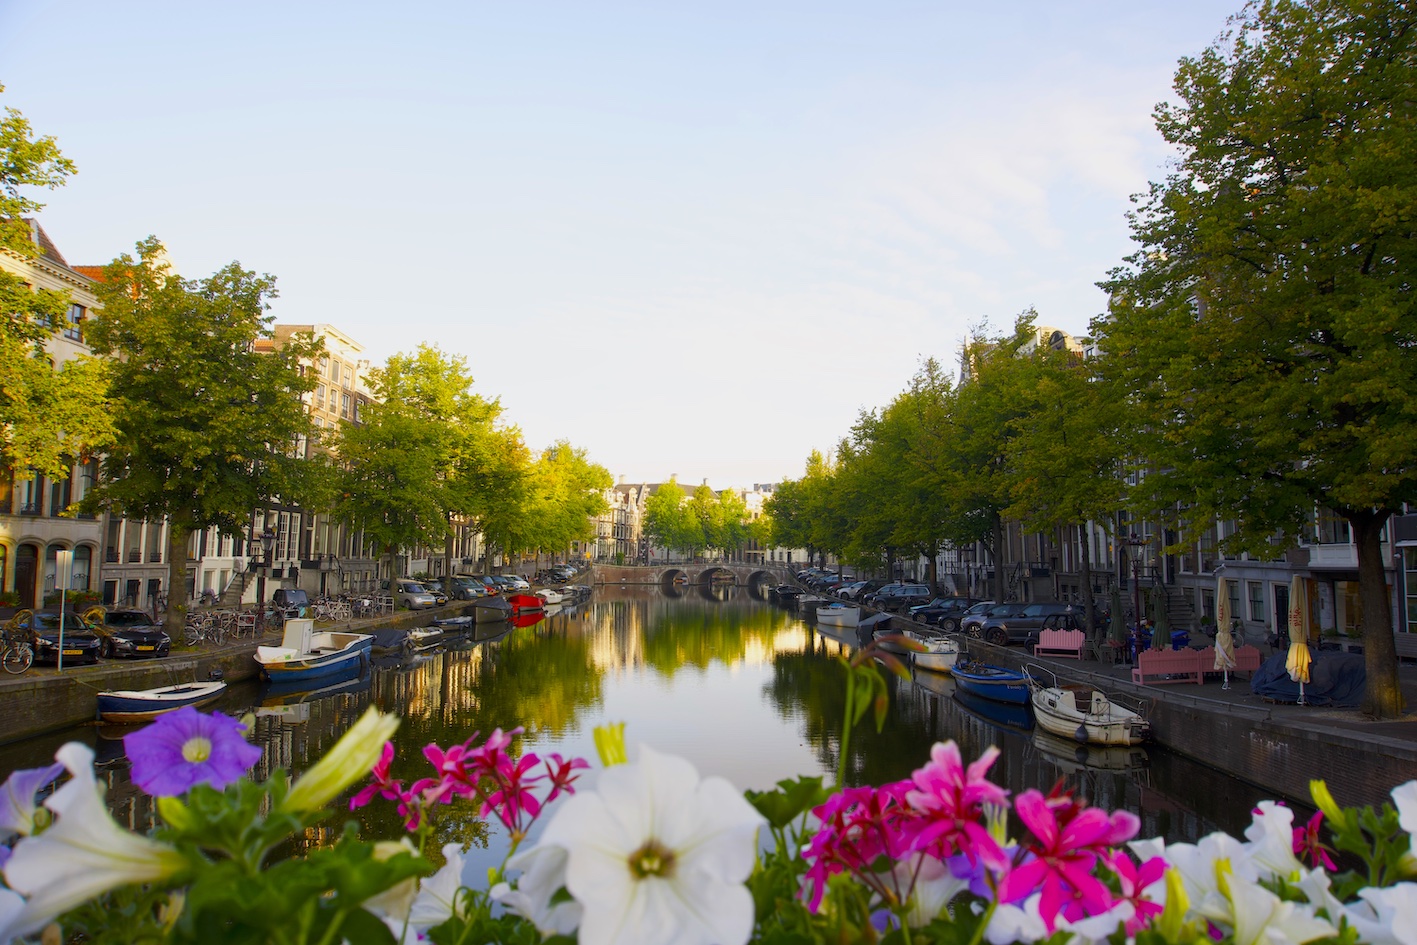 A photos of an Amsterdam canal at sunrise framed by some colorful flowers